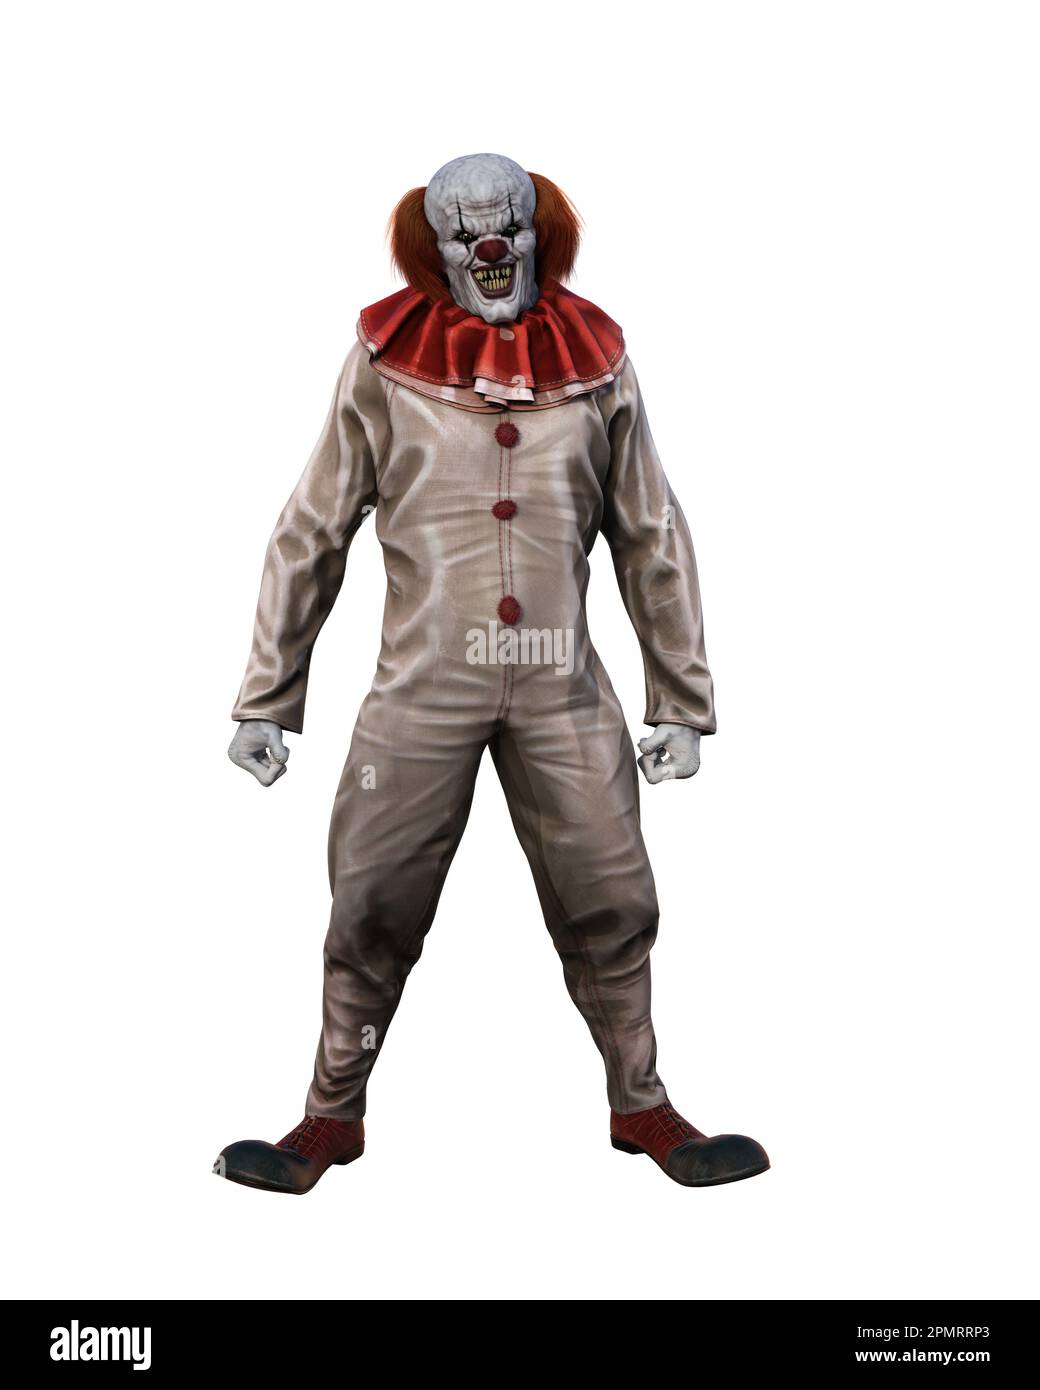 Scary clown standing in costume with wide evil grin showing sharp pointed teeth. 3D illustration isolated on white background. Stock Photo